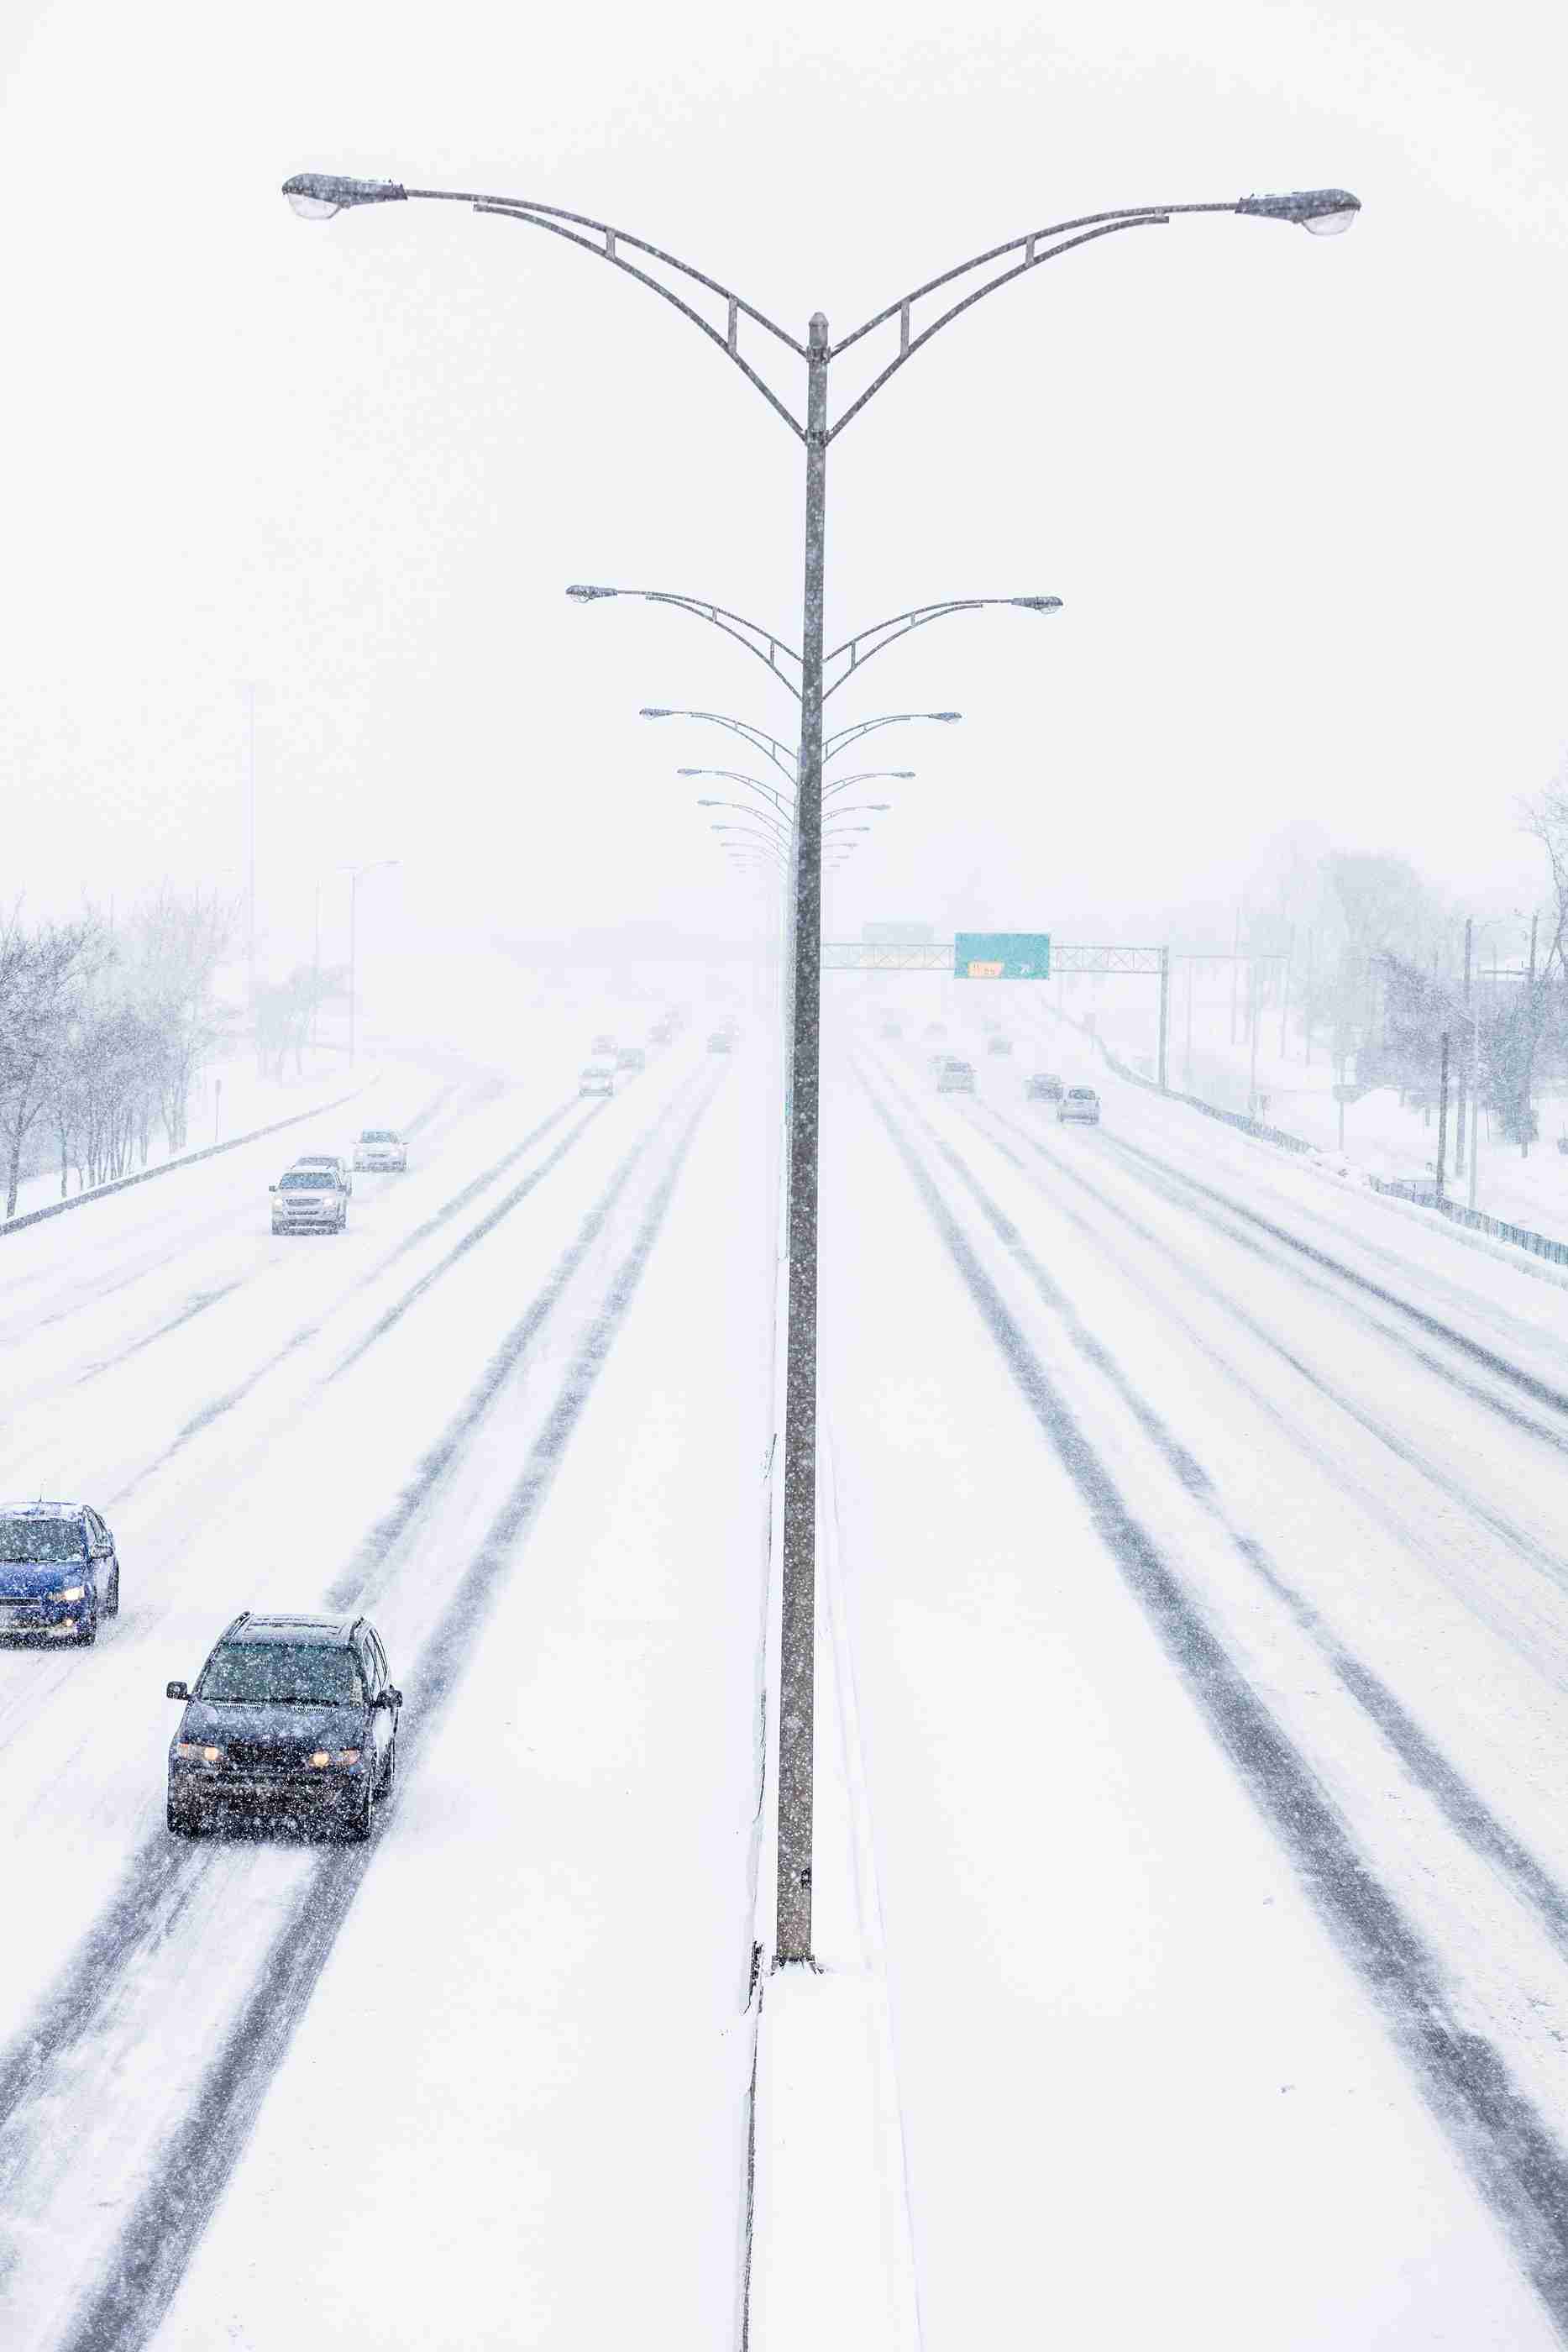 Symmetrical Photo Of The Highway During A Snowstorm